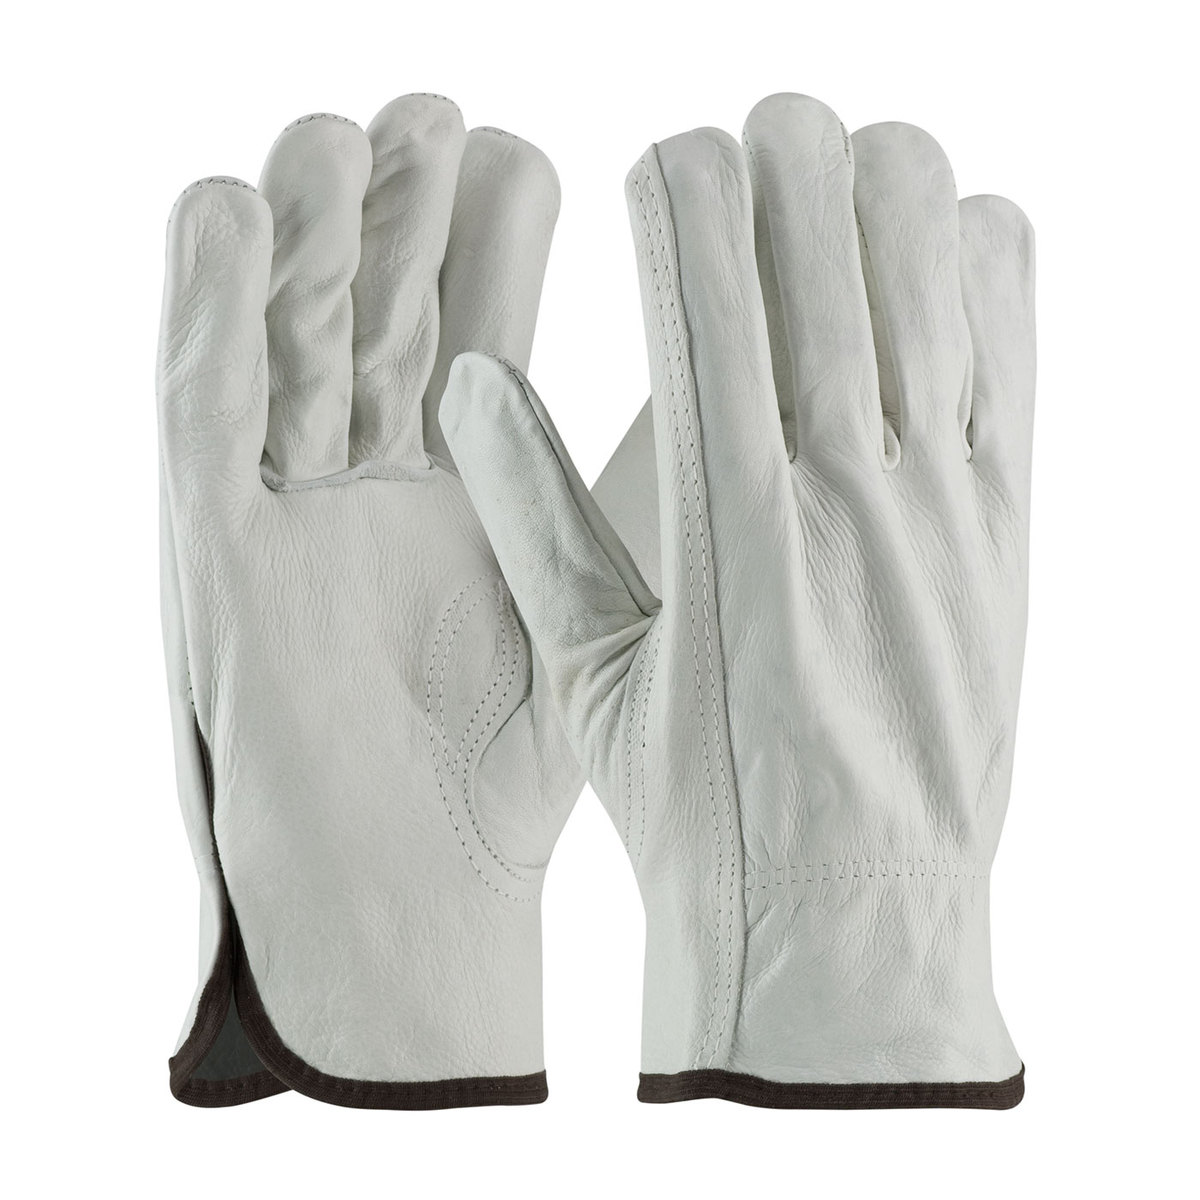 PIP® 2X Natural Top Grain Cowhide Unlined Drivers Gloves